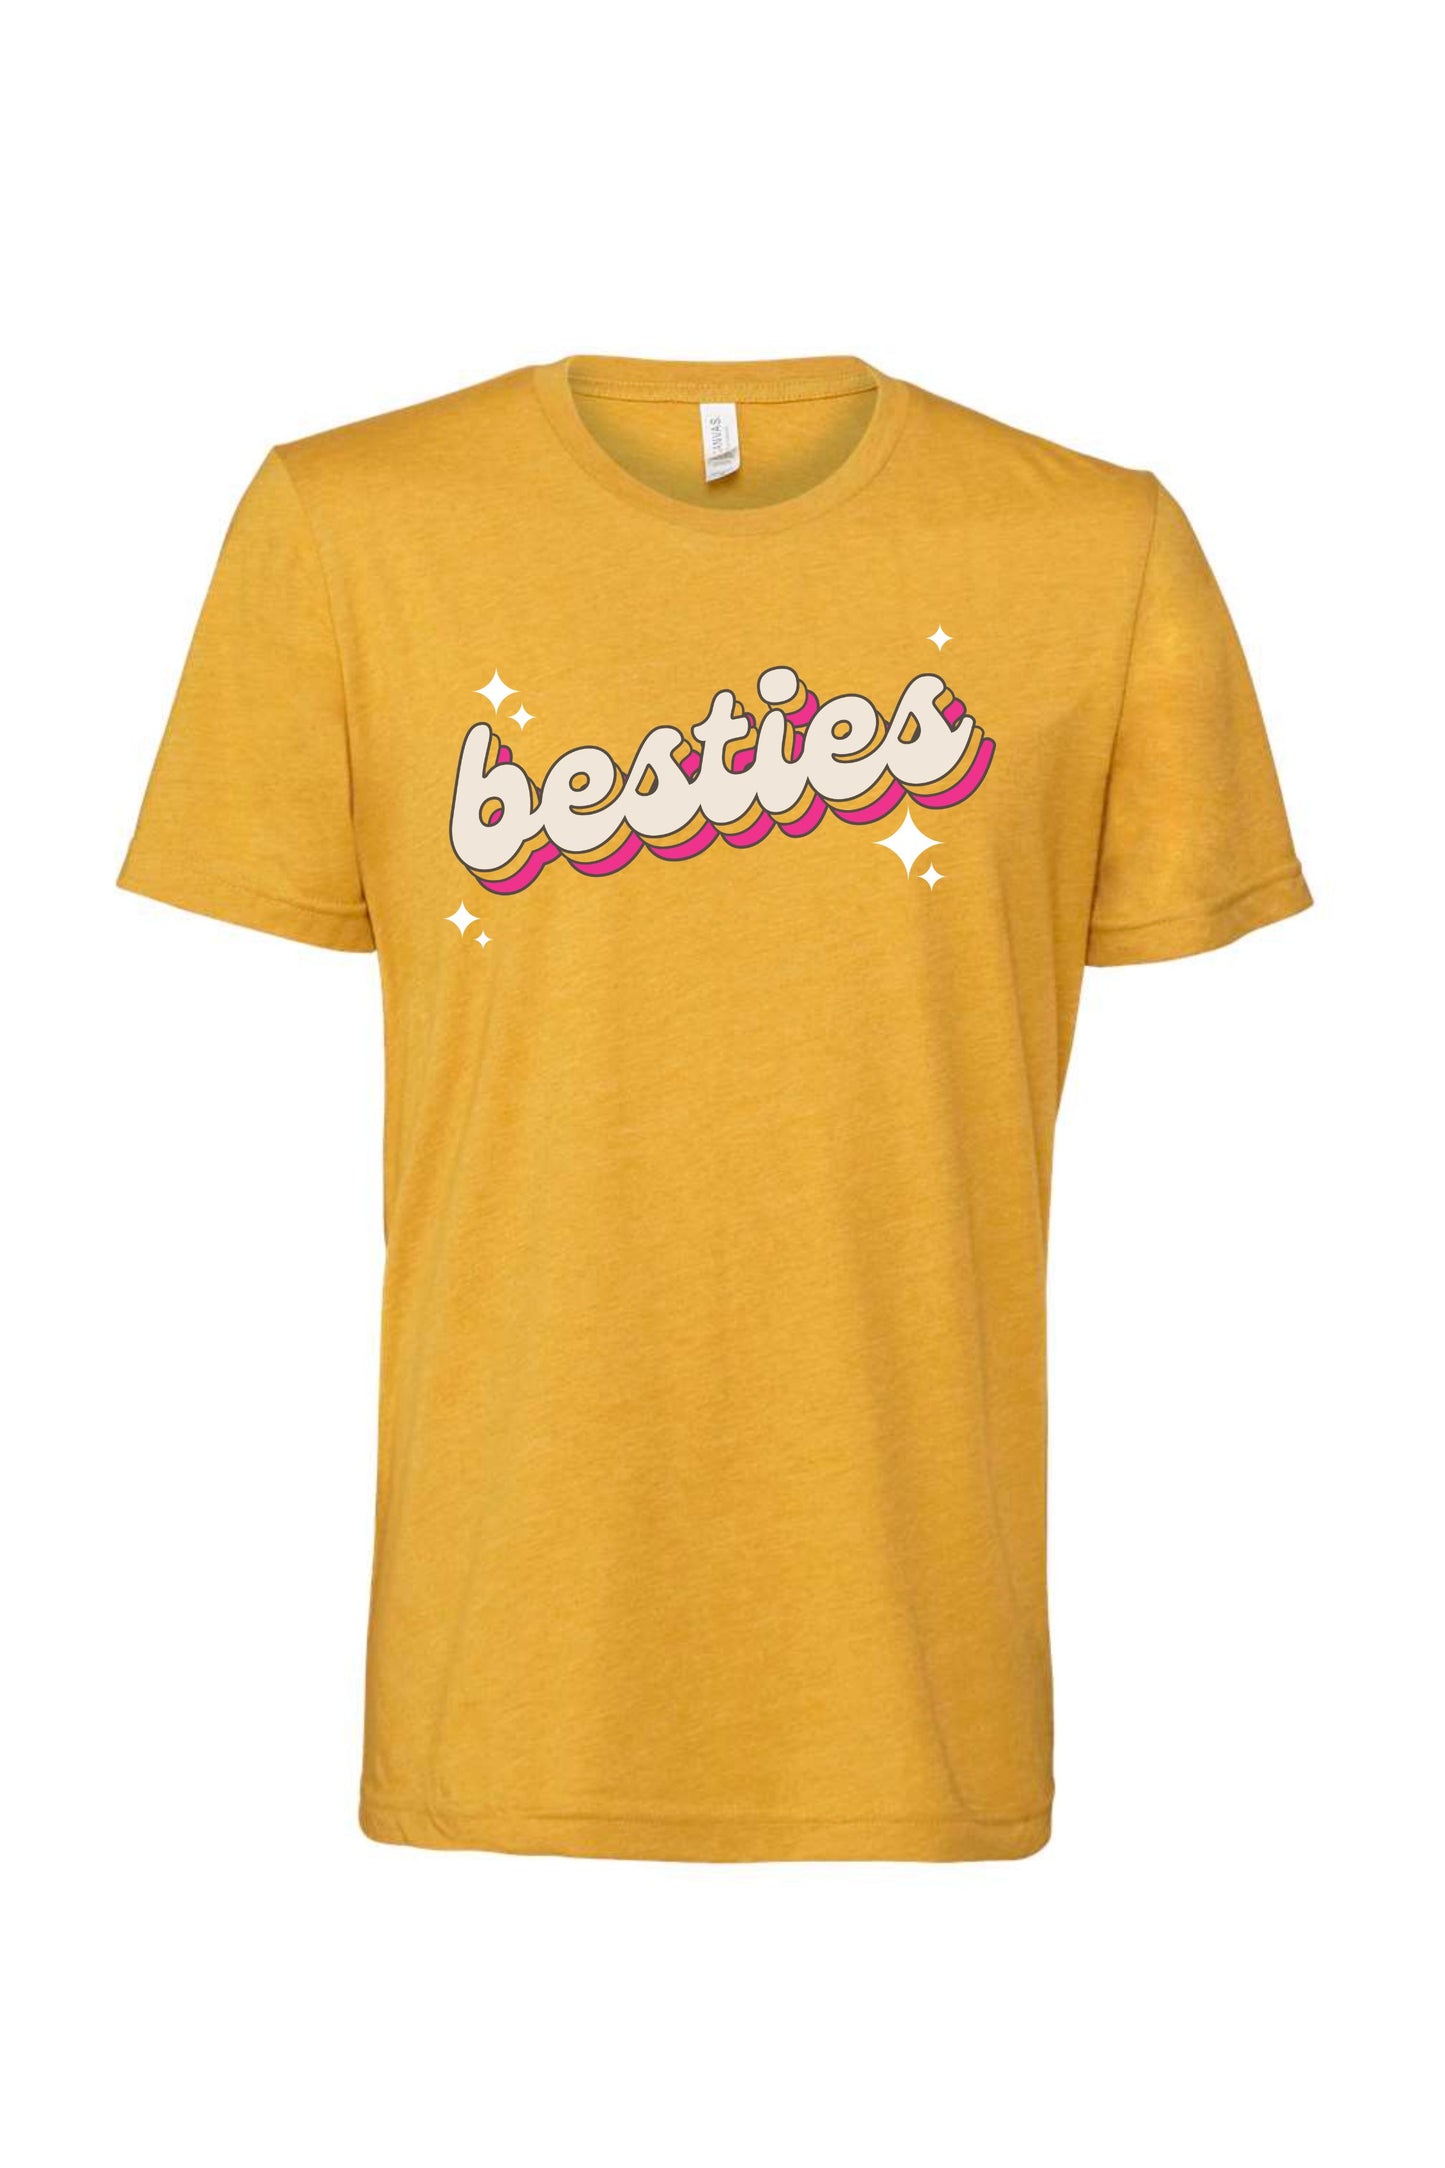 Besties | Tee | Kids-Sister Shirts-Sister Shirts, Cute & Custom Tees for Mama & Littles in Trussville, Alabama.